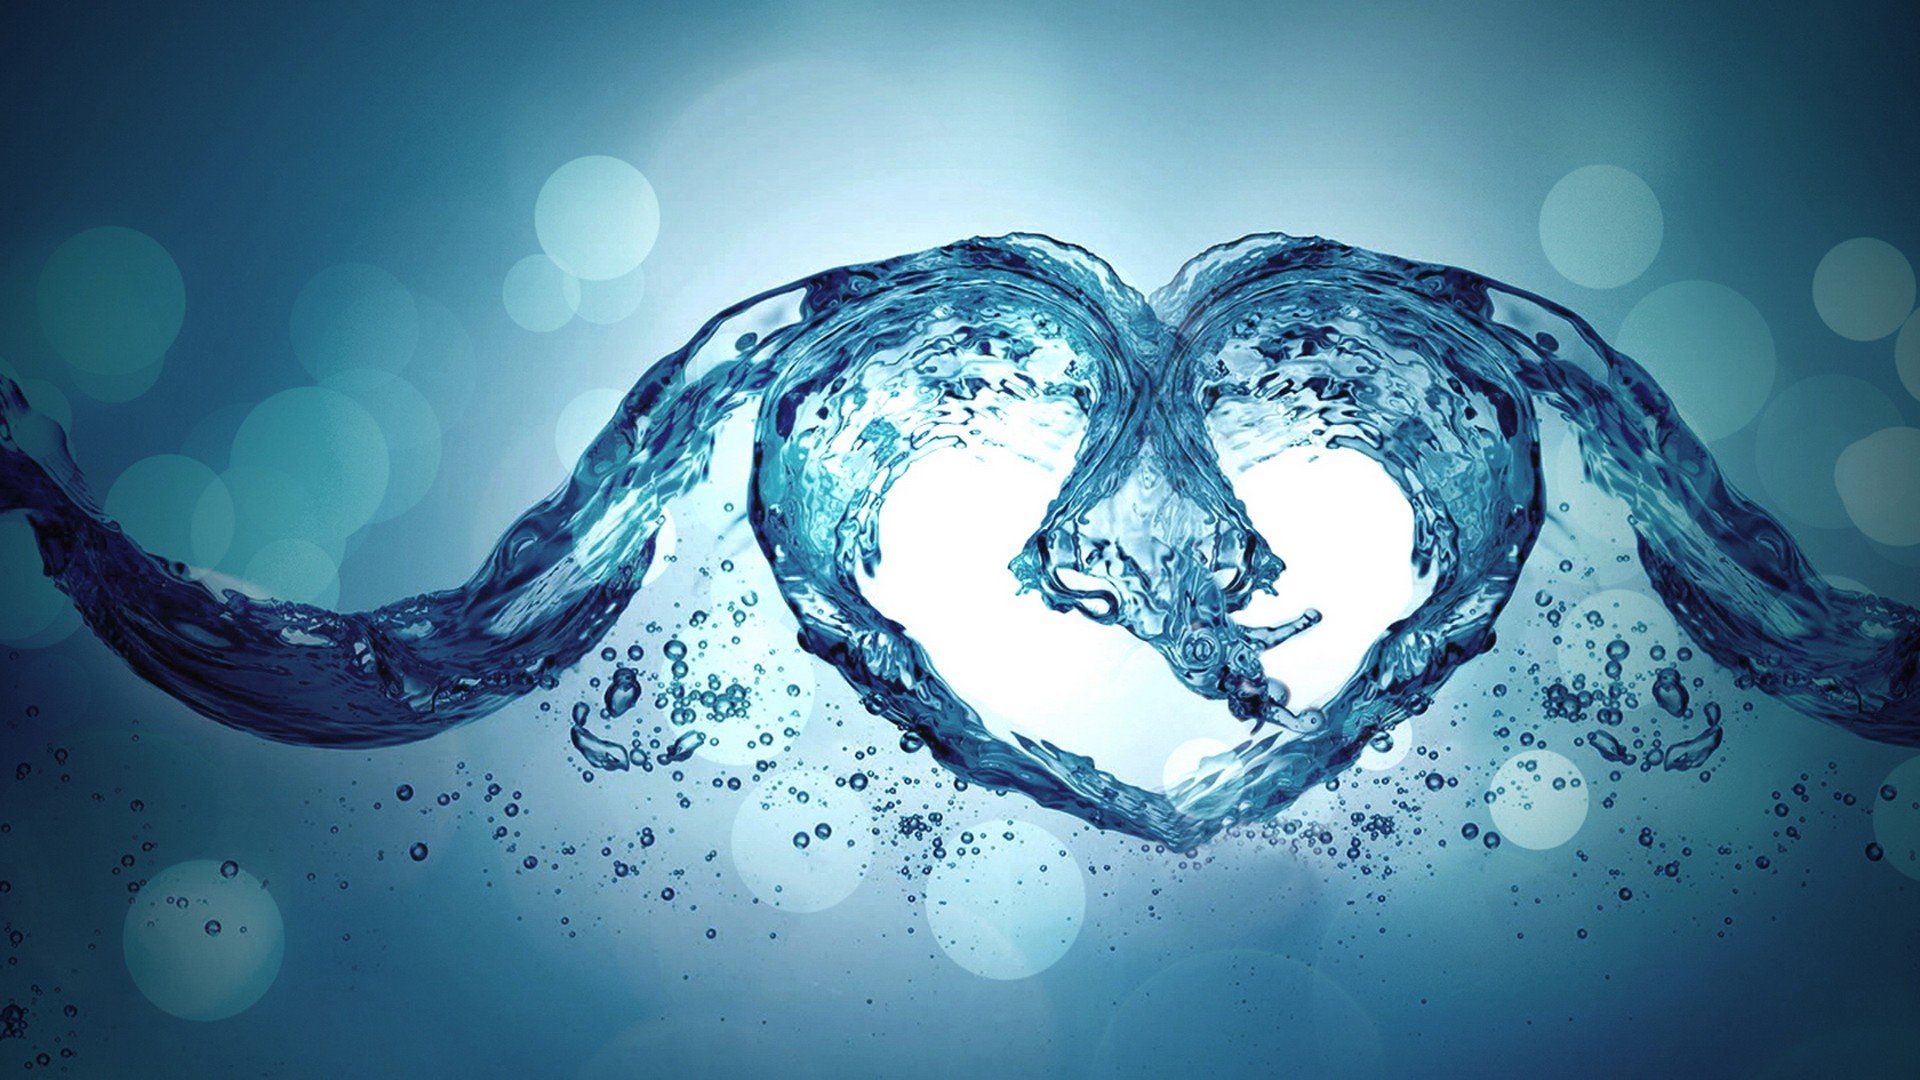 Water Abstract Wallpaper 1920x1080 Water Abstract Love 1920x1080